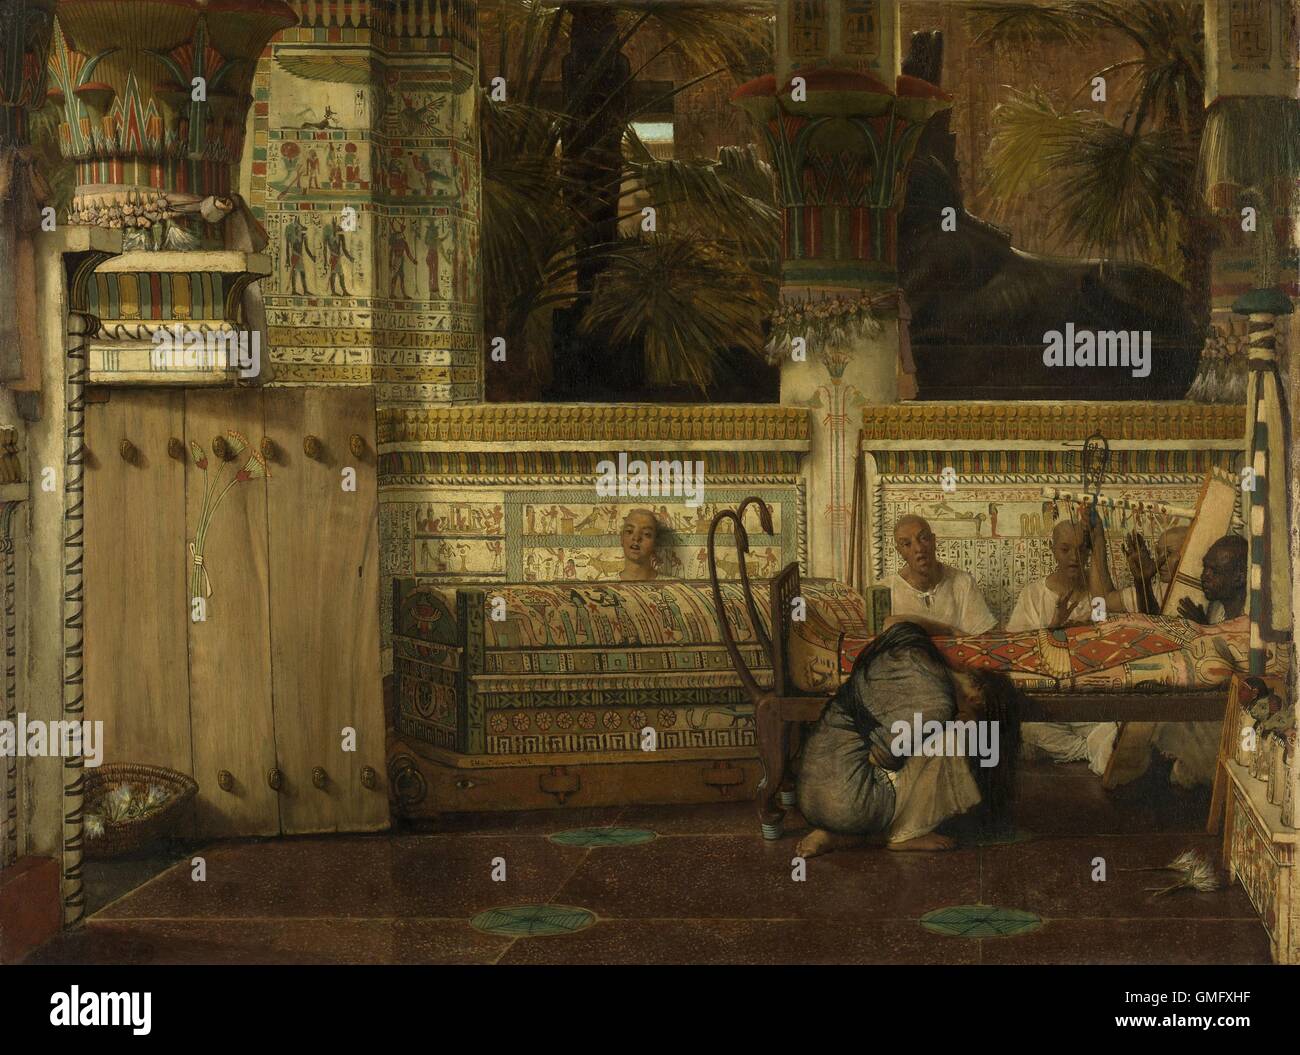 Egyptian Widow, by Lawrence Alma Tadema, 1872, English painting oil on canvas. Woman mourns at the inner mummy case of her husband. Priests and singers and architectural details enrich the scene (BSLOC 2016 2 241) Stock Photo